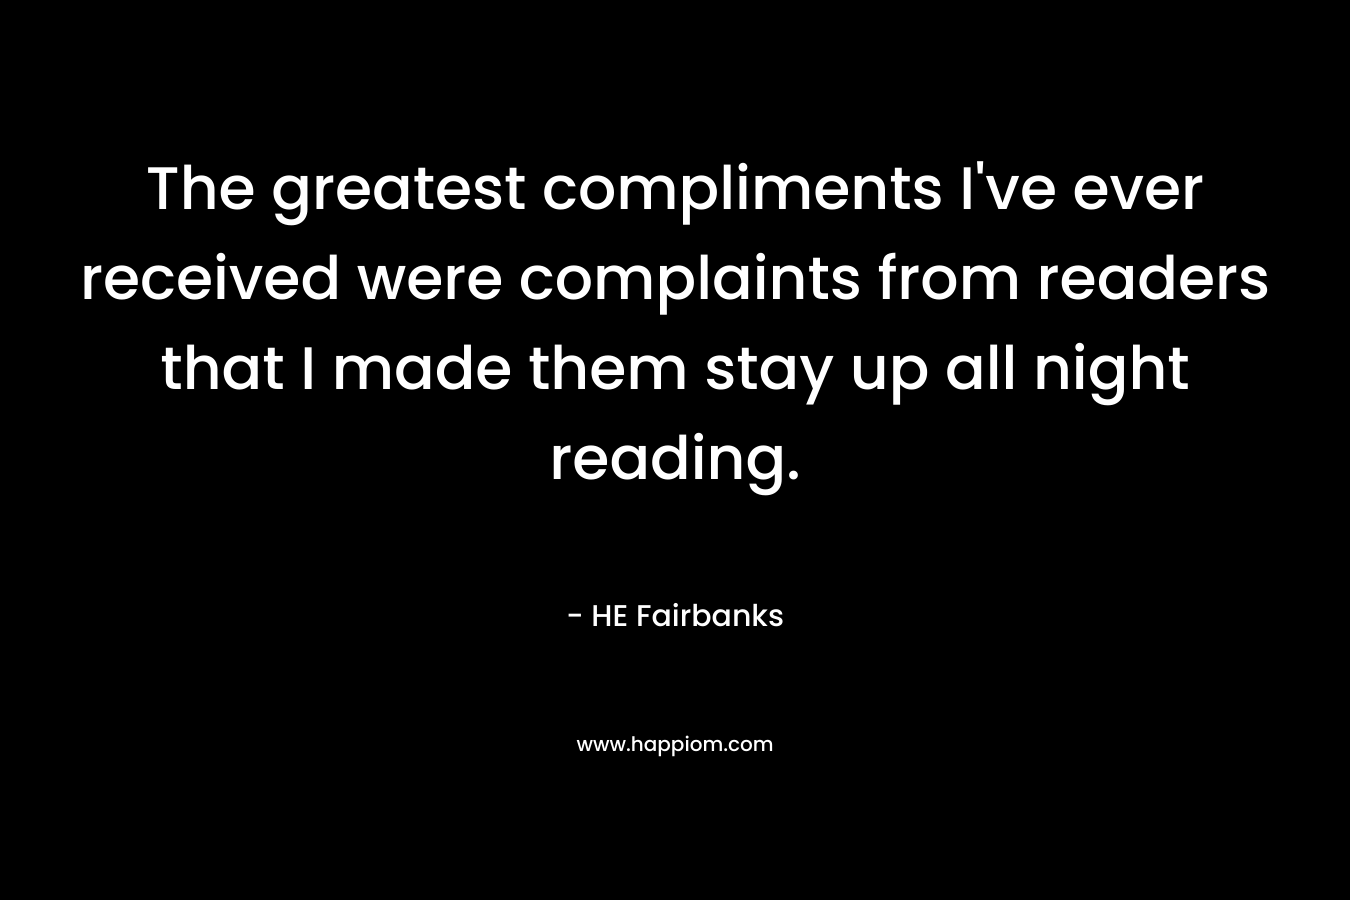 The greatest compliments I’ve ever received were complaints from readers that I made them stay up all night reading. – HE Fairbanks